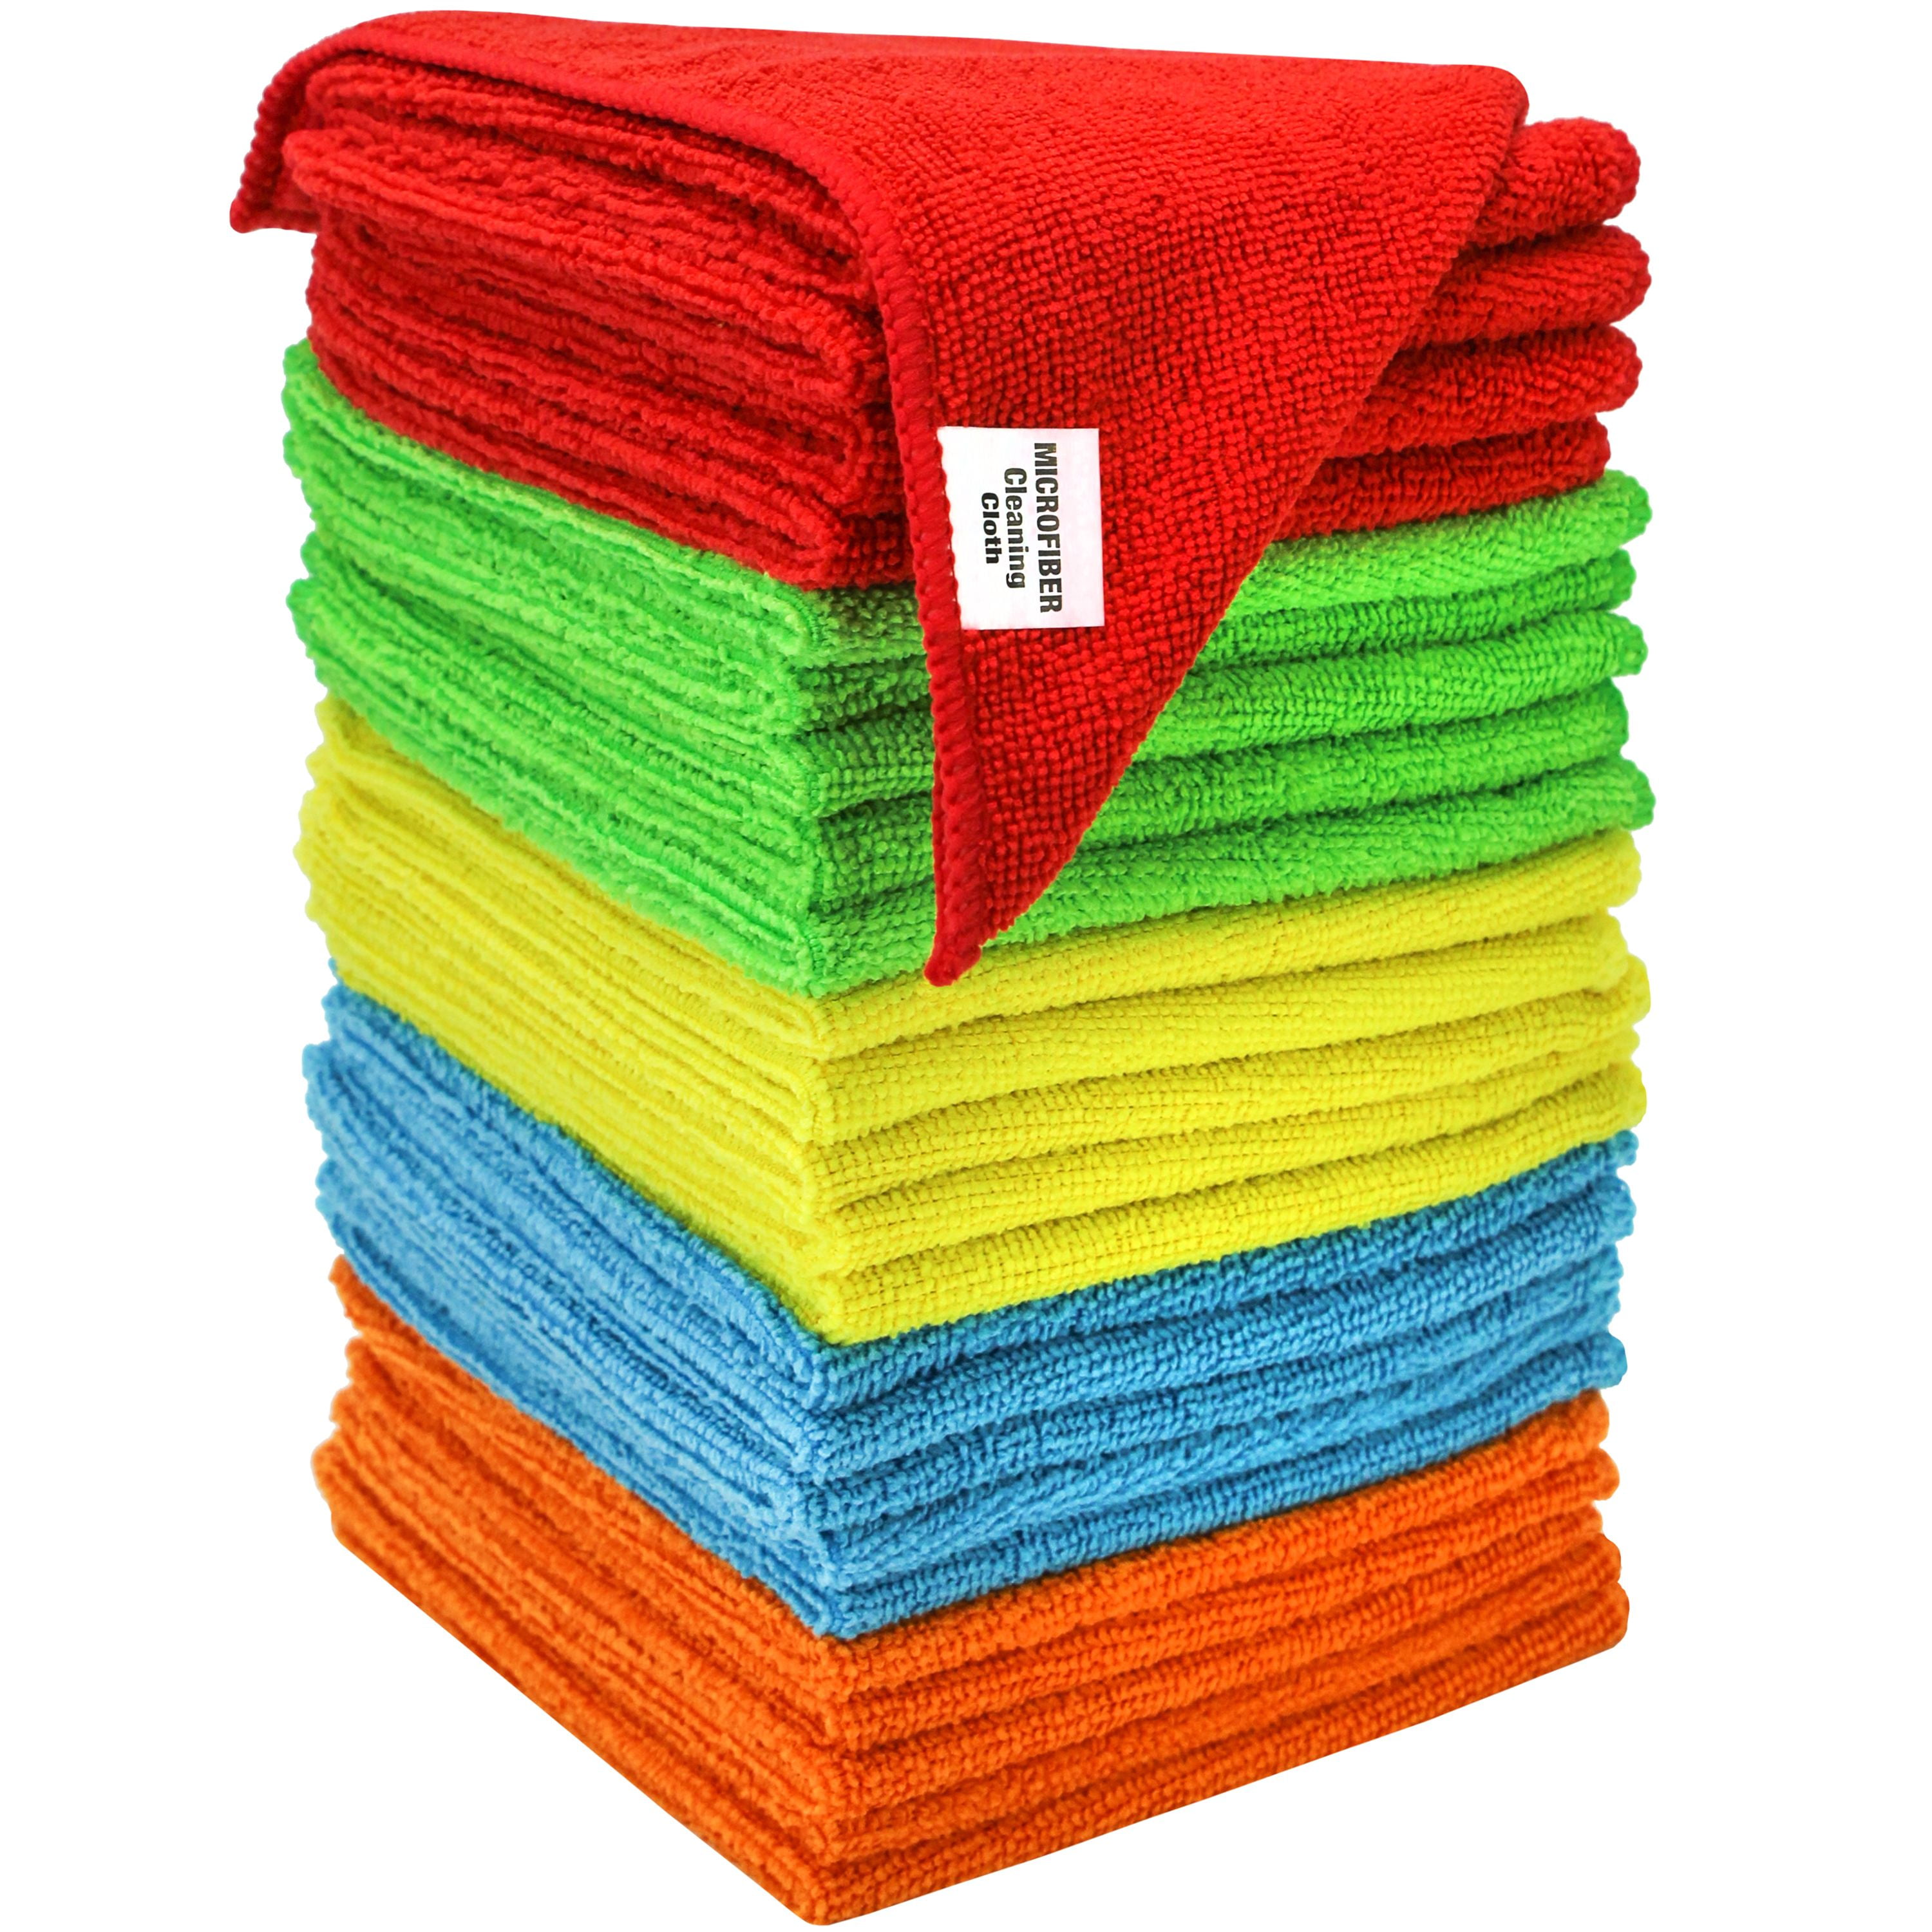 S&T INC. Microfiber Cleaning Cloths 11.5 x 11.5, 25 Pack